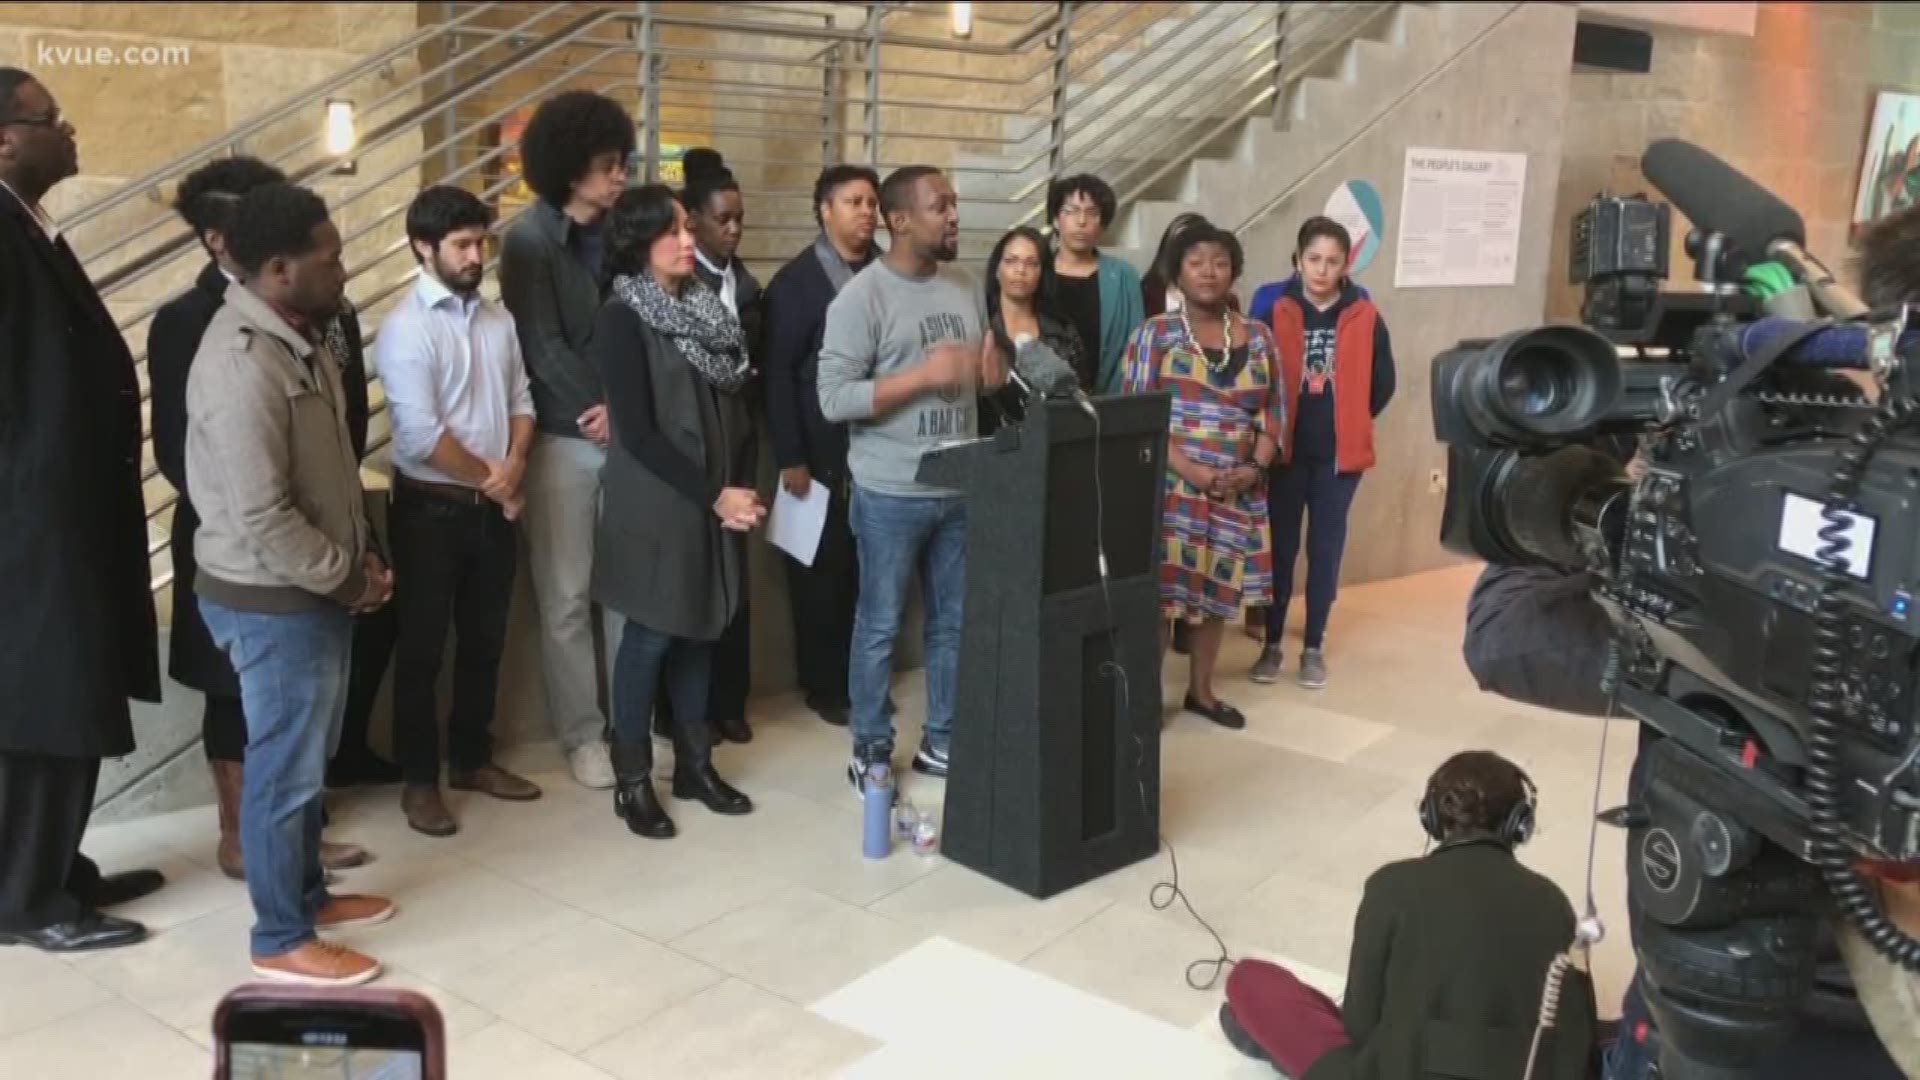 There were strong words from city leaders and community activists after a complaint alleged a former APD assistant chief used racist language.